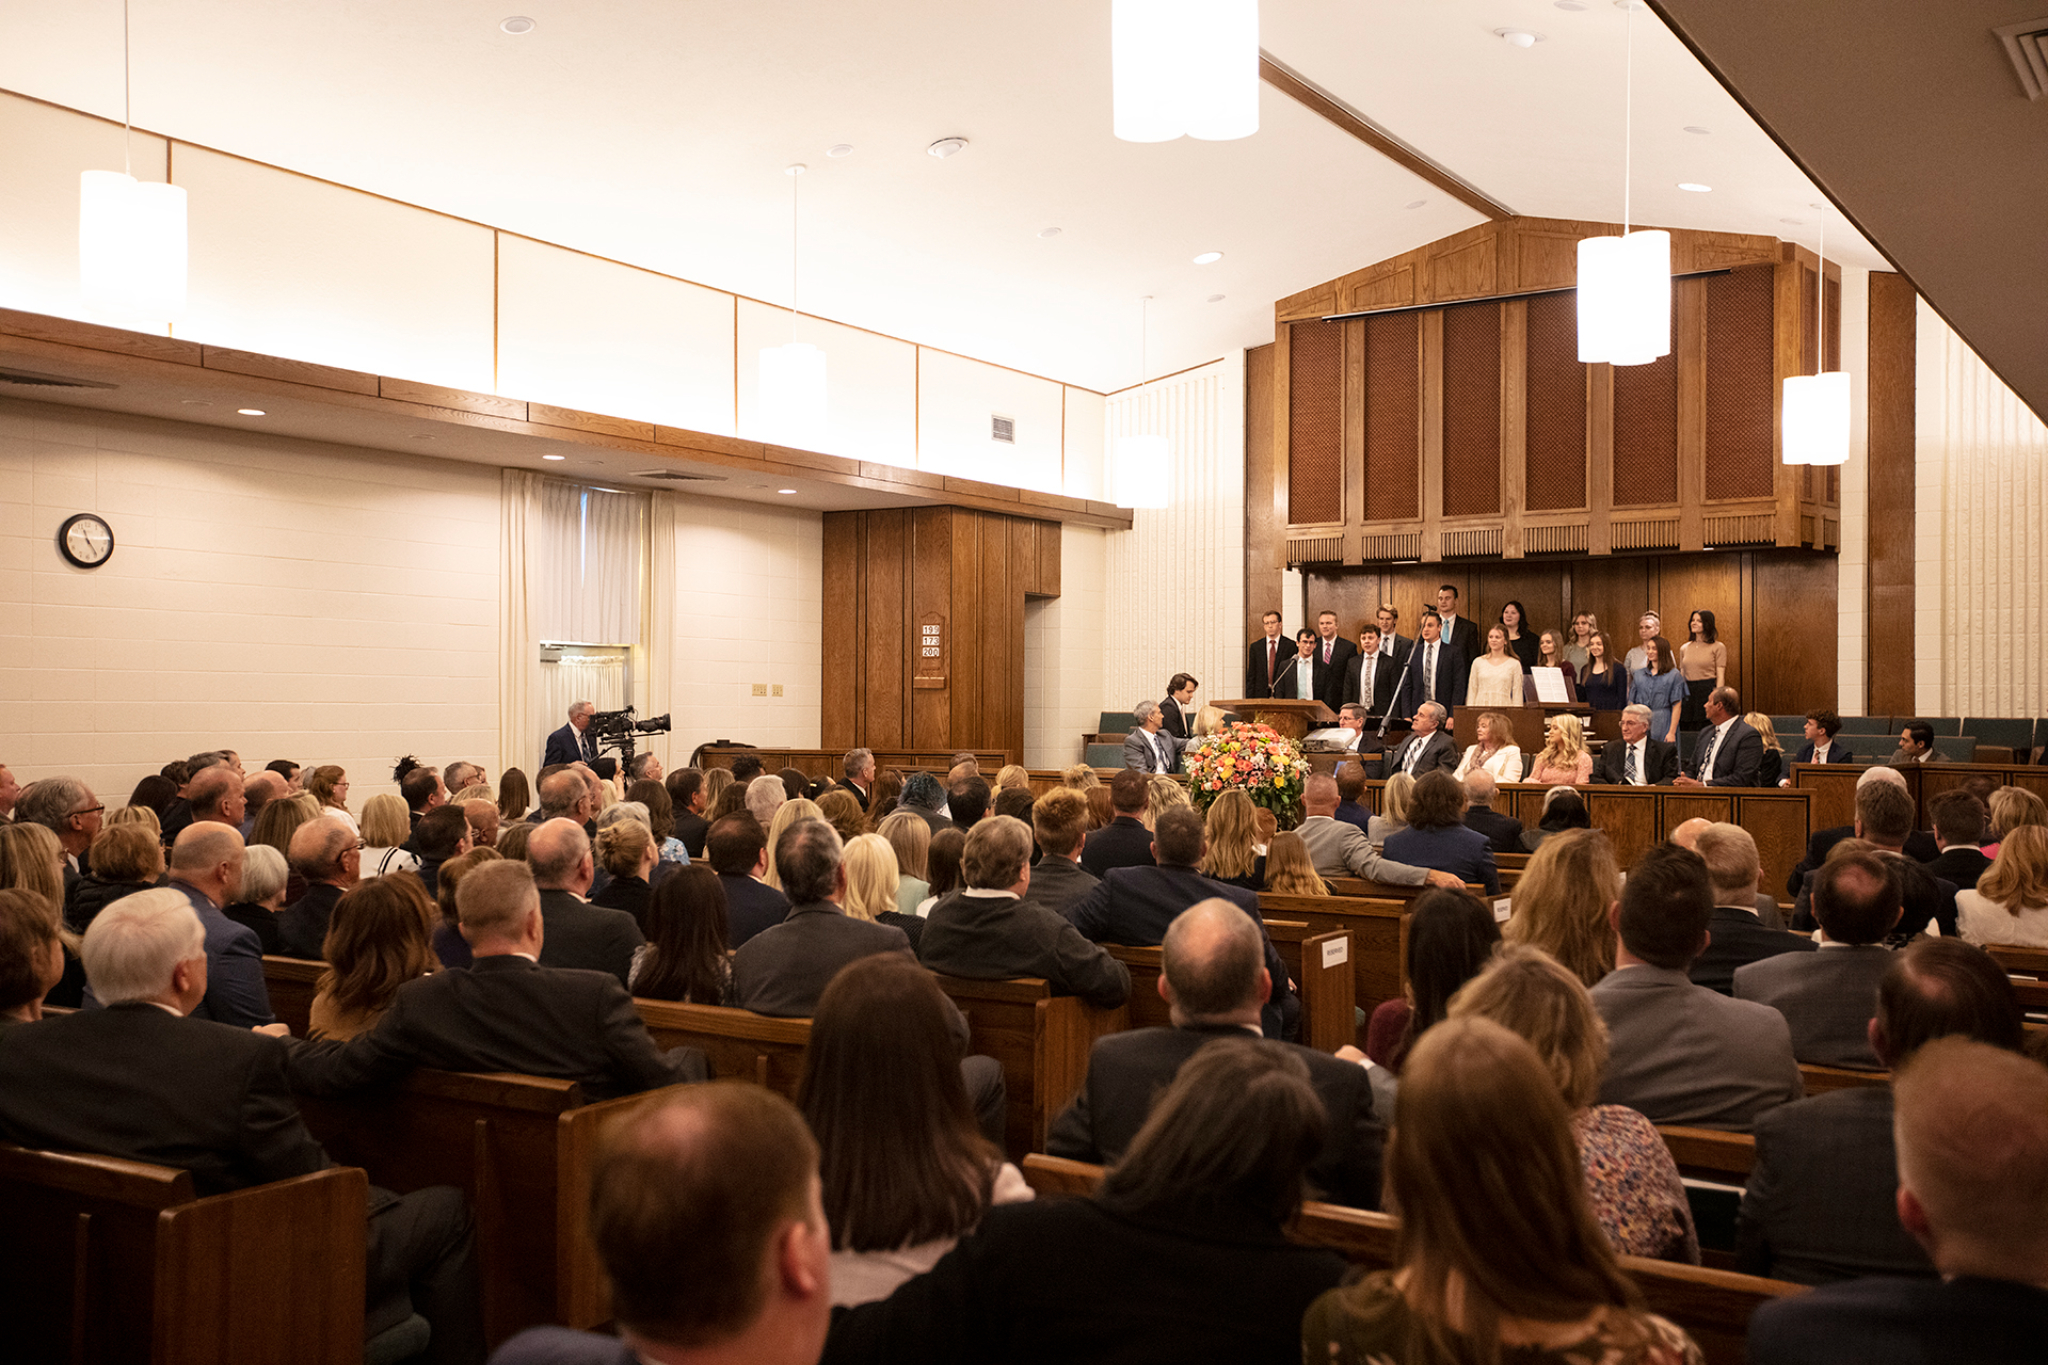 A congregation inside a Latter-day Saint chapel, with a choir of men in suits and women in dresses at the front of the room.